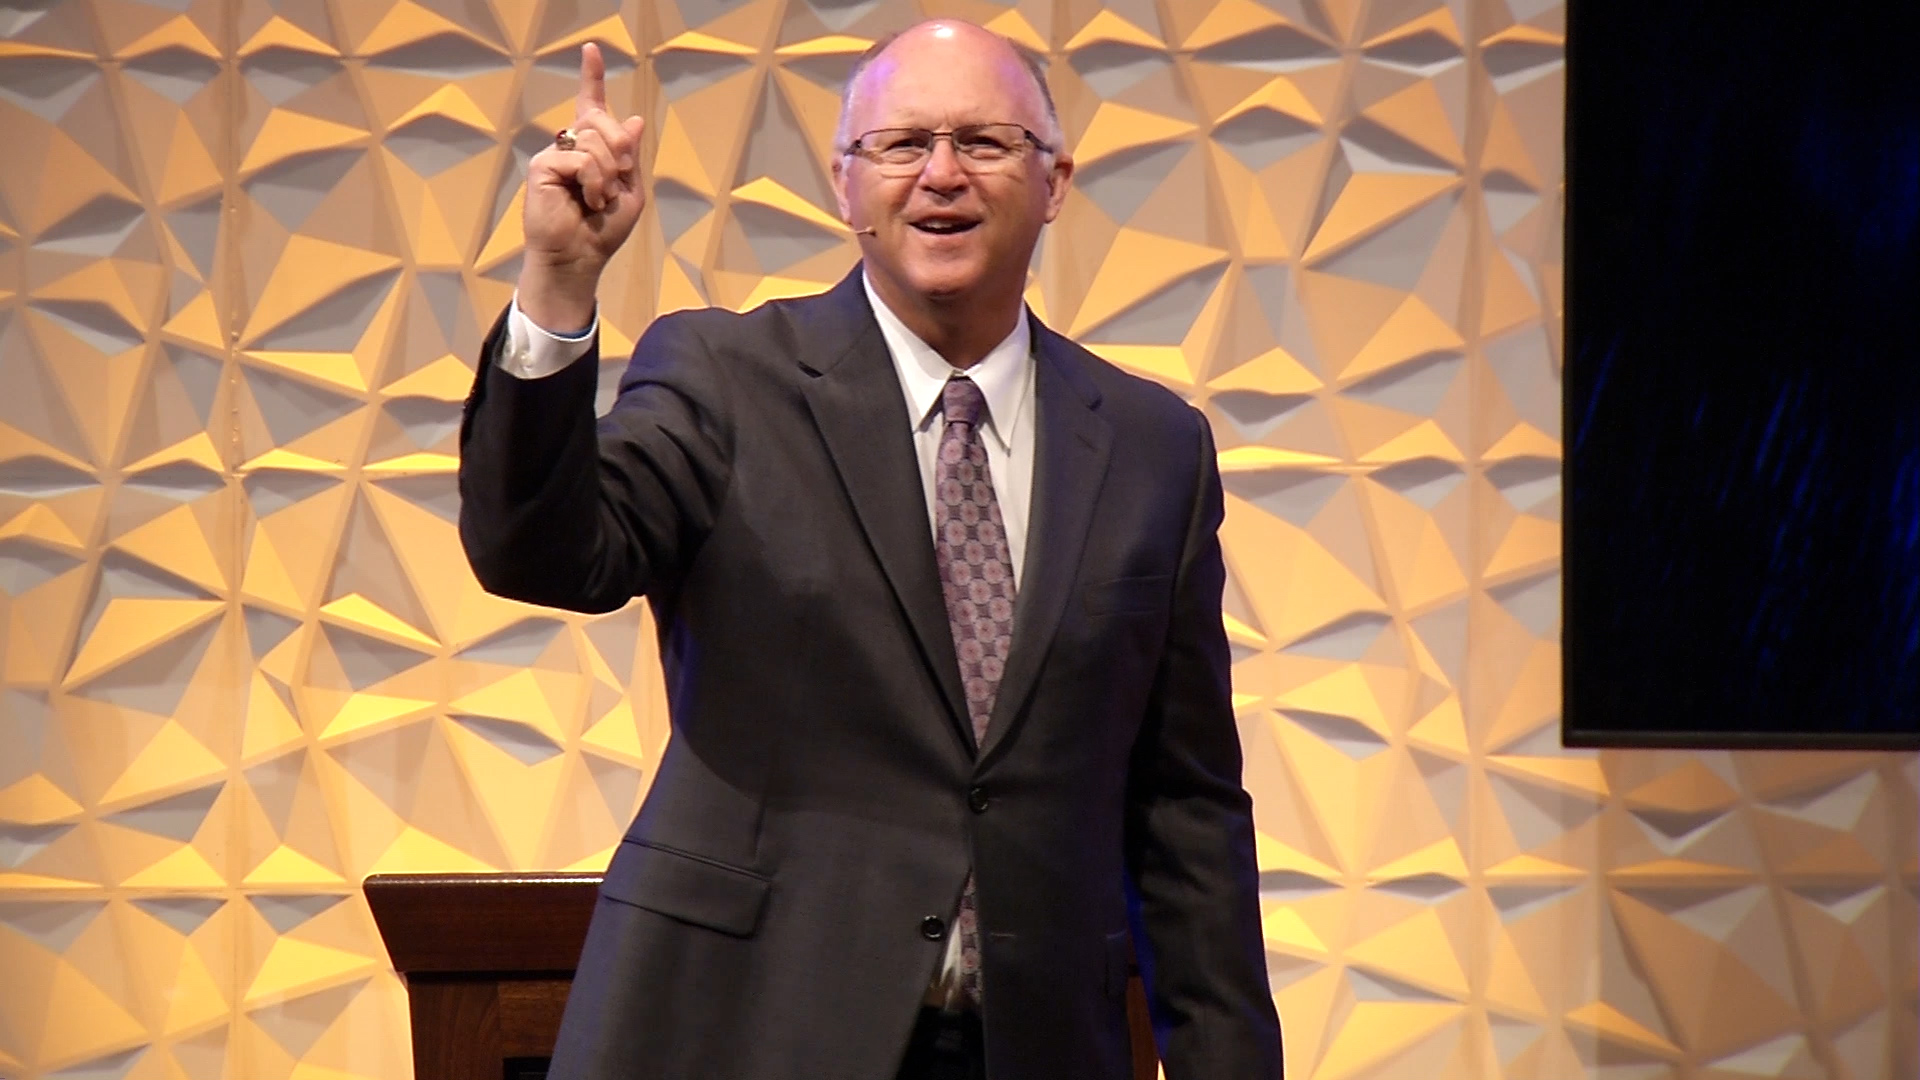 Pastor Paul Chappell: Perspective From the Cross